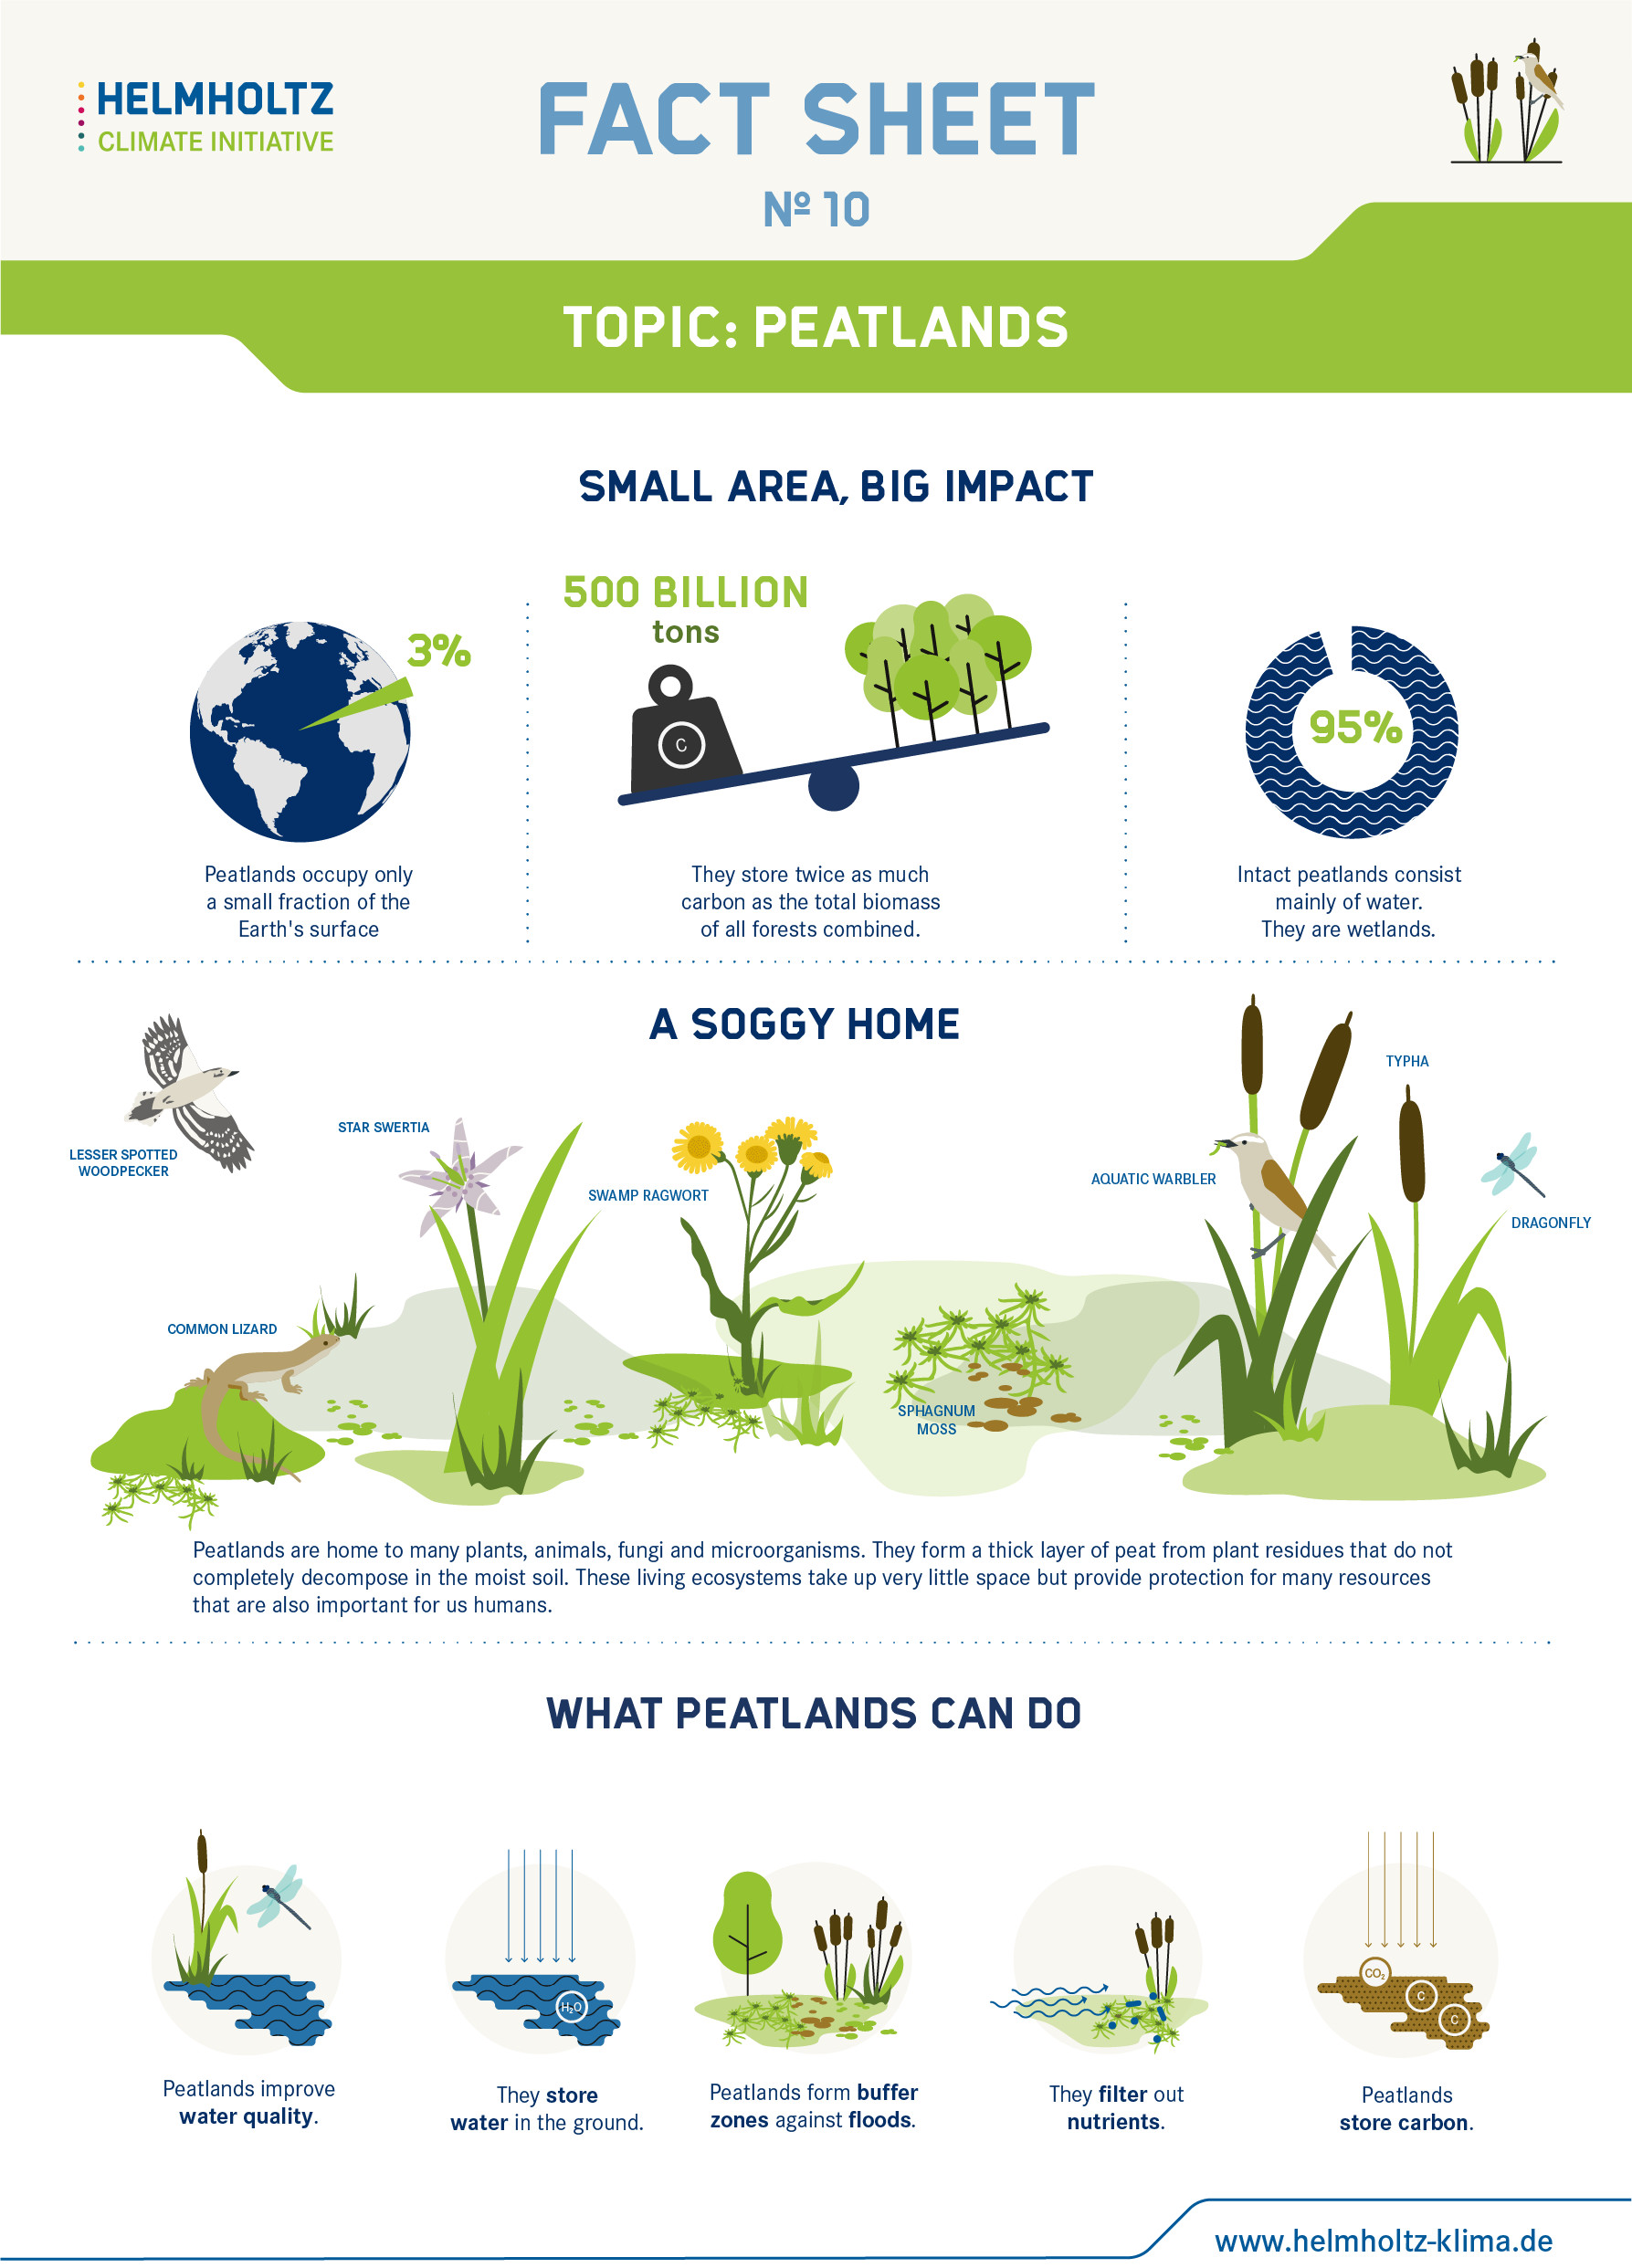 Page 1 of the factsheet showing the biodiversity, carbon storage capacity, and environmental functions of peatlands.